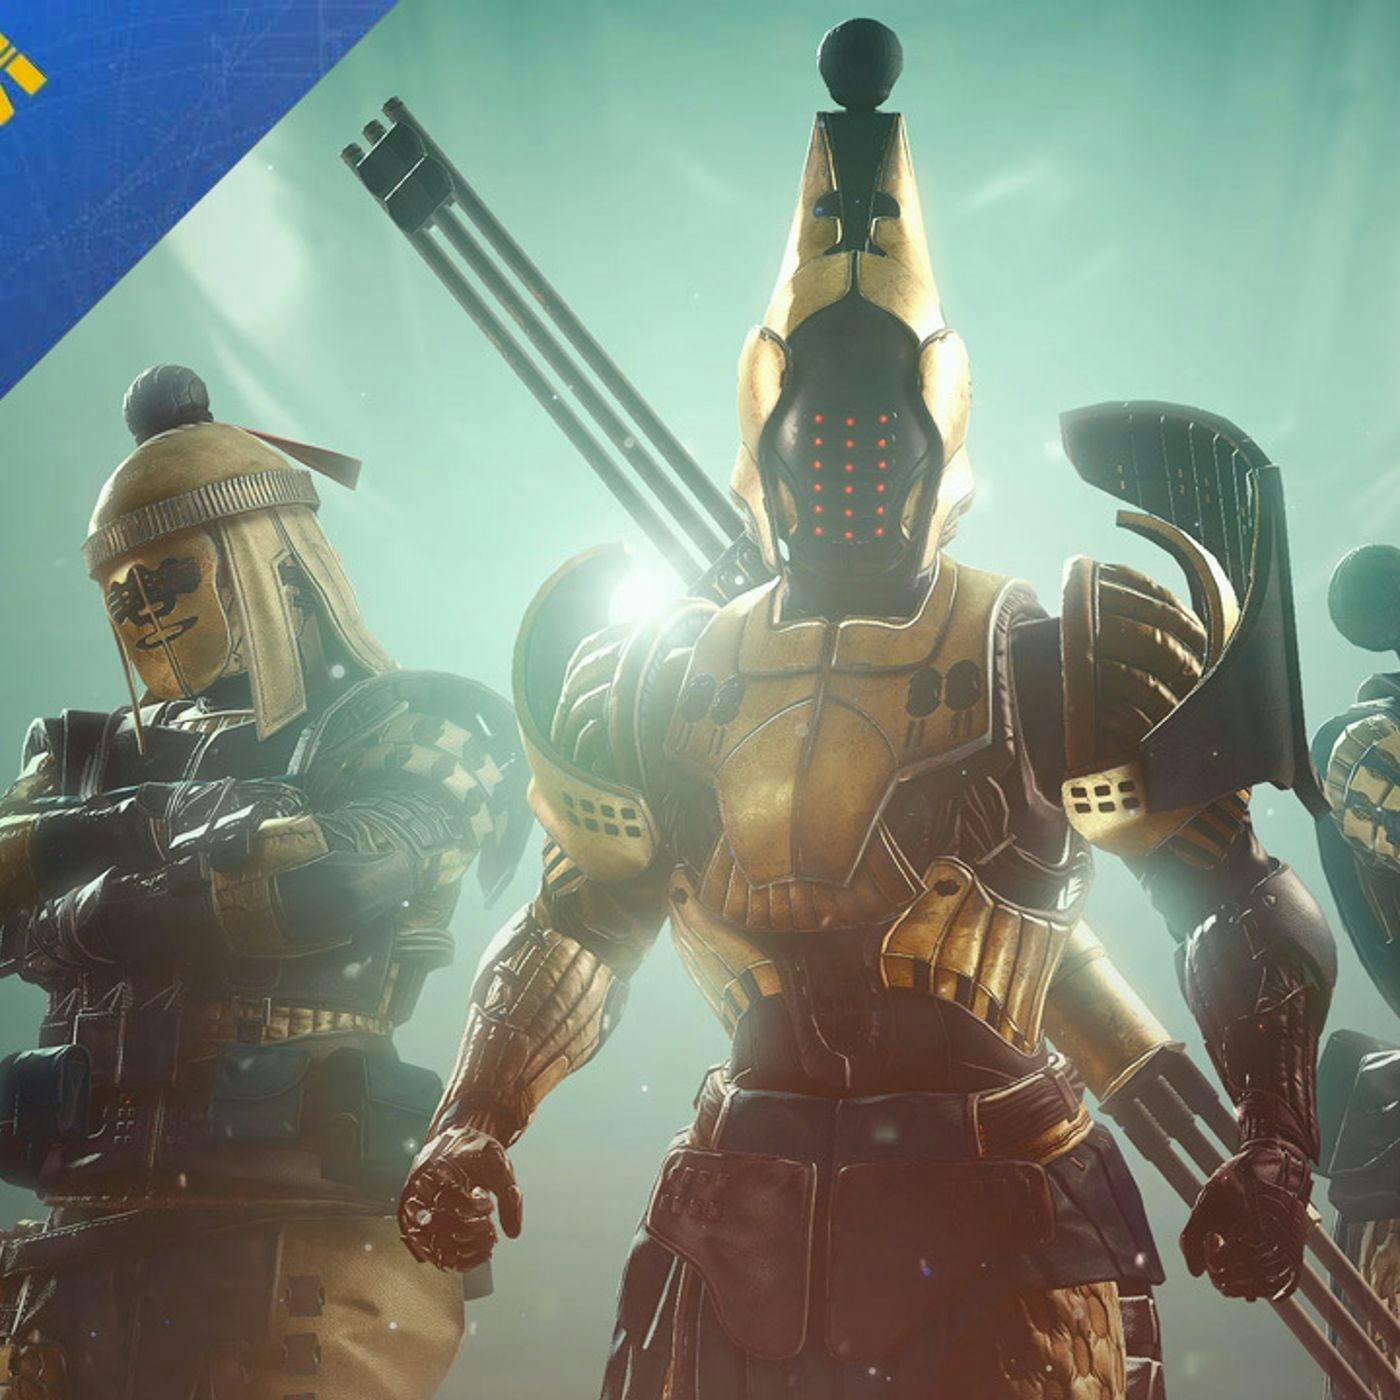 Destiny 2 Reactions to 2021 Update, Dinosaur Armor, and Trials Cancellations